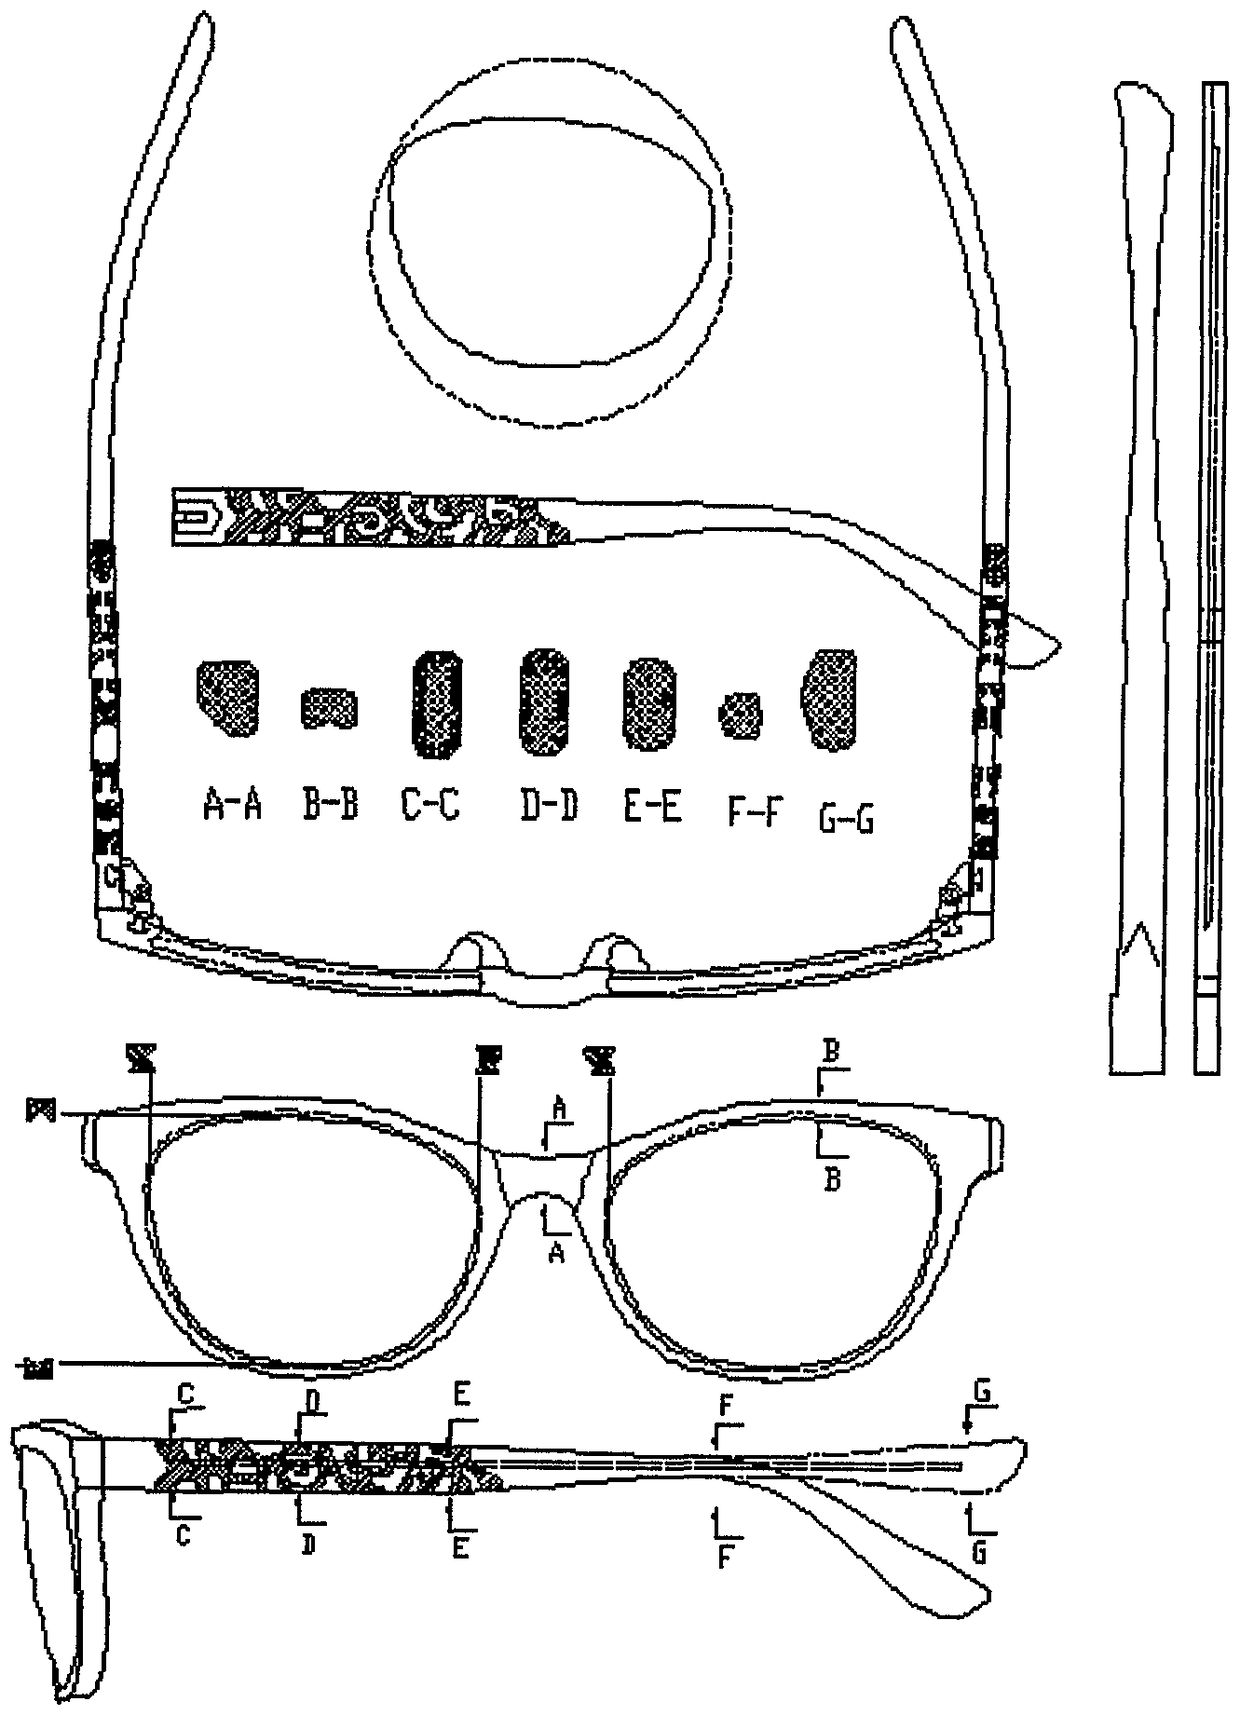 Glasses processing method in which metal sheet is wrapped on the surface of rubber sheet material